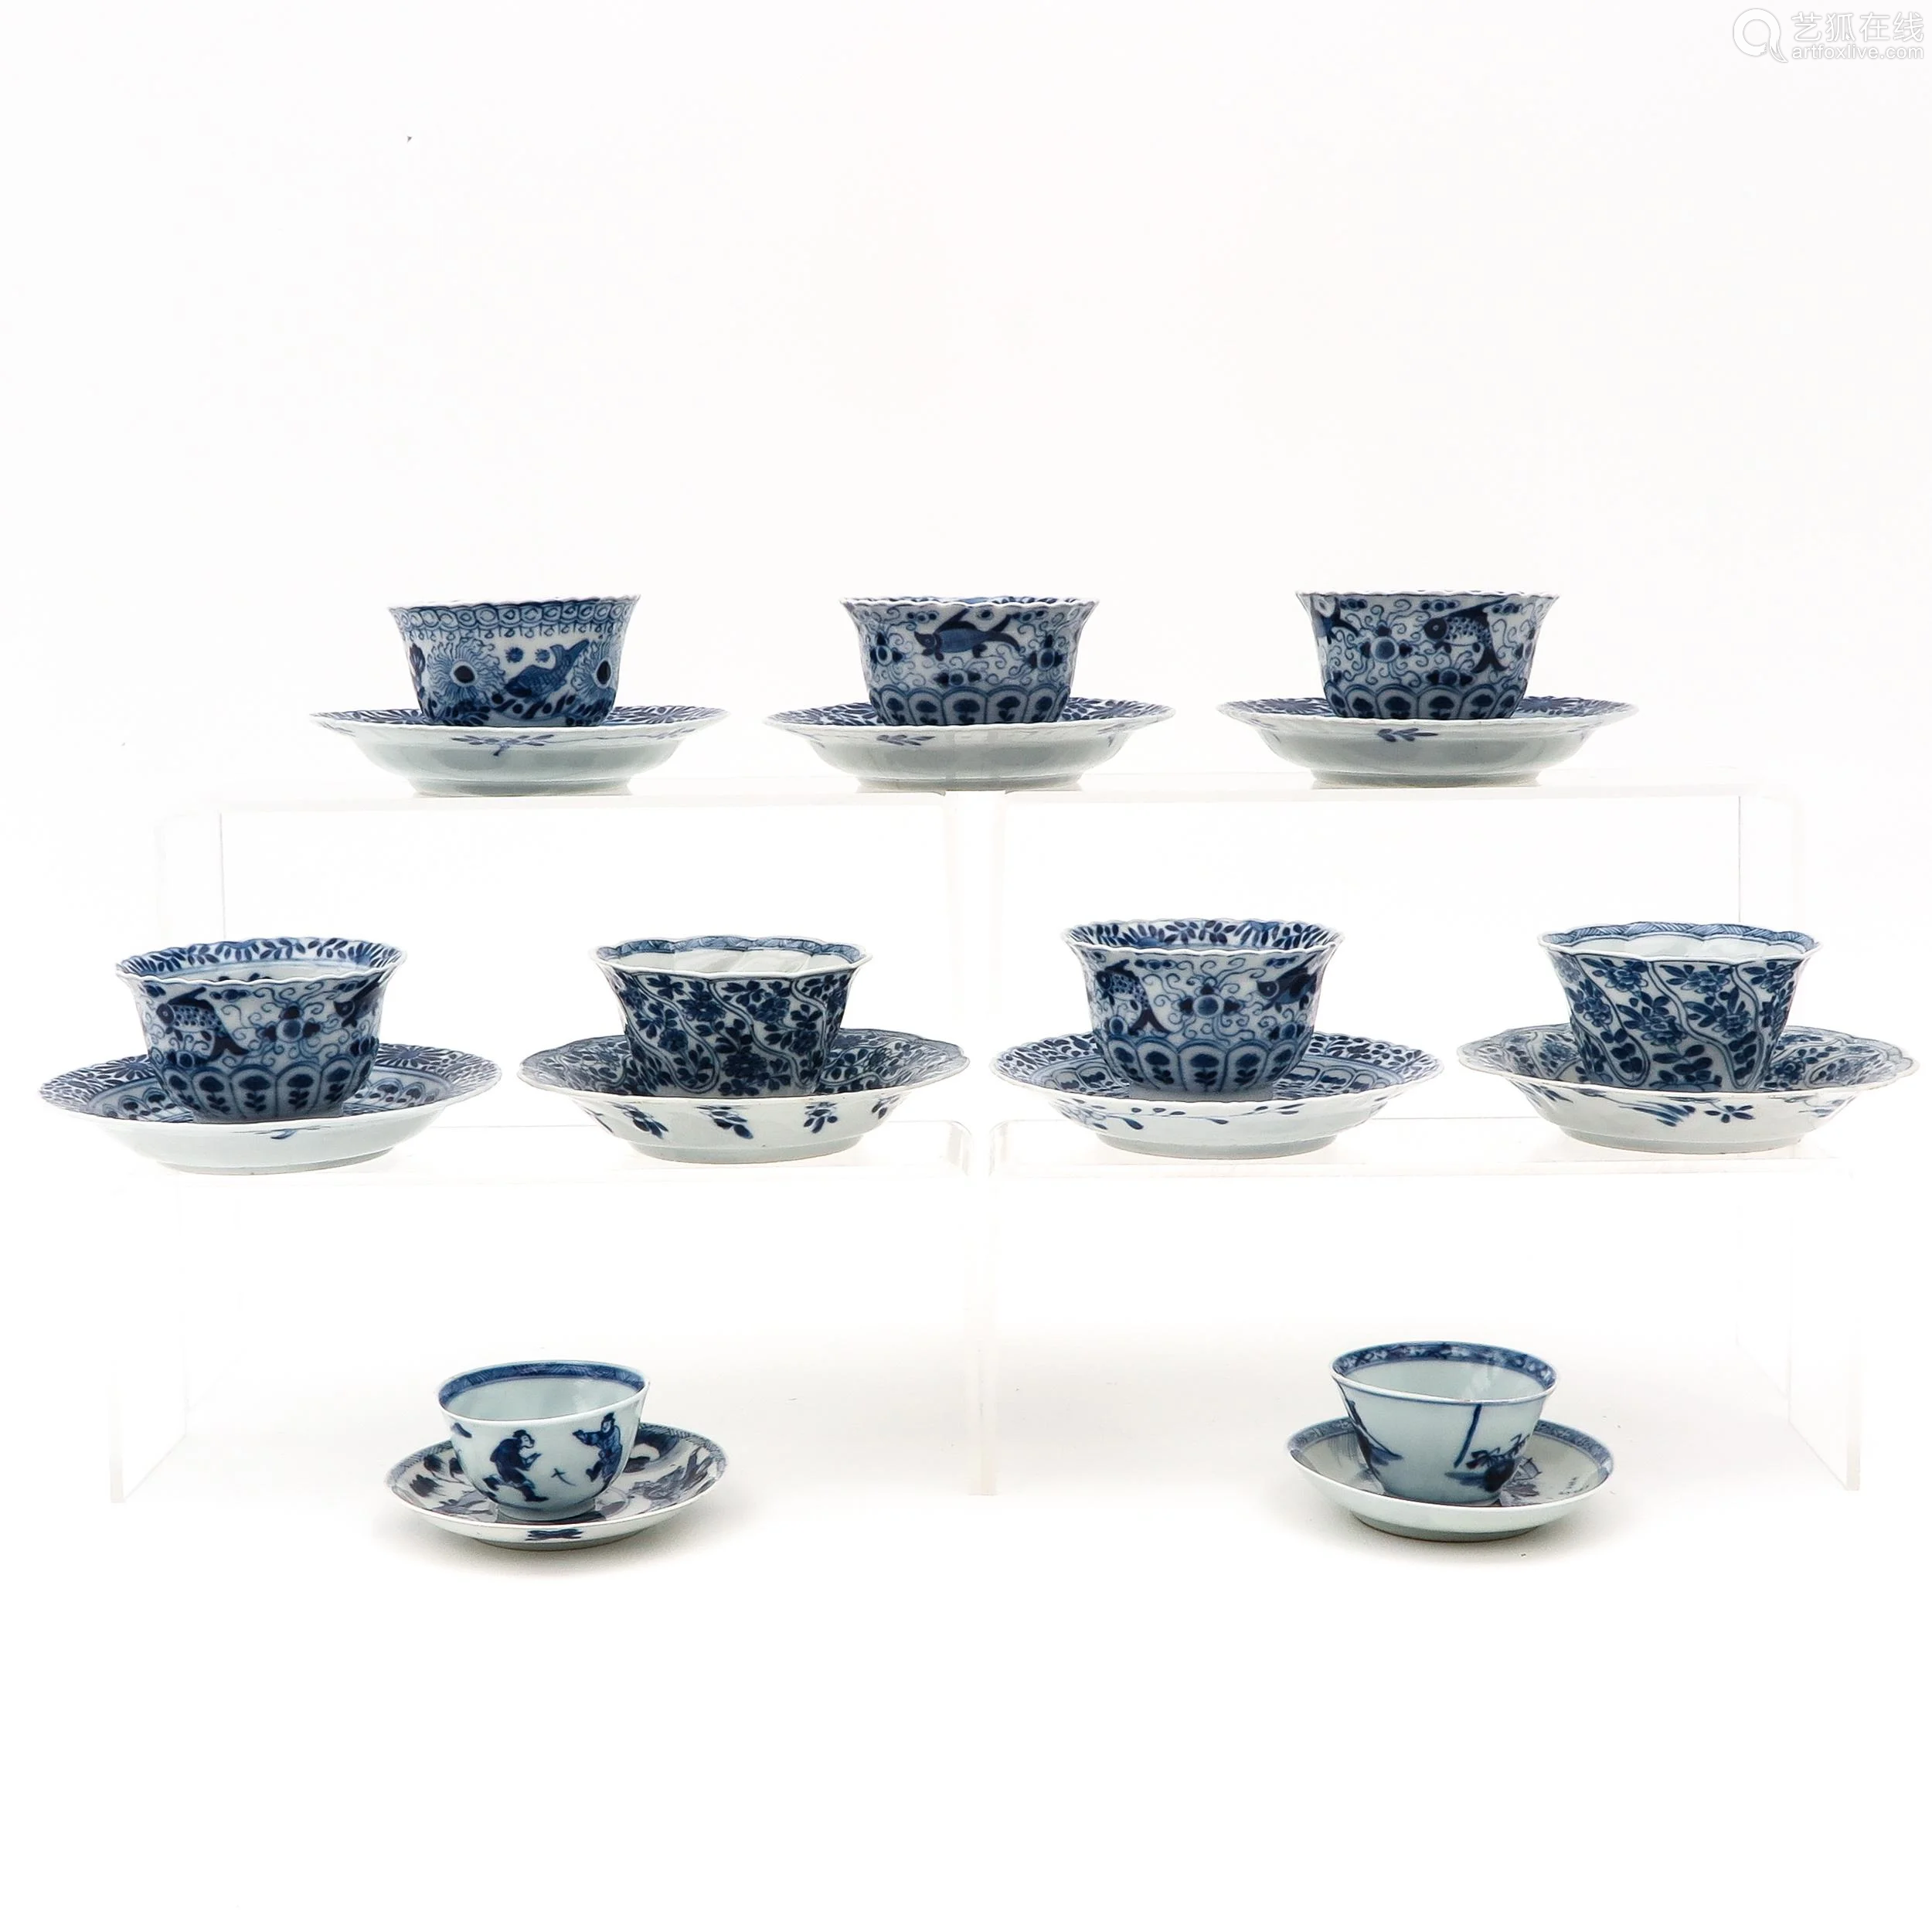 a collection of cups and saucer